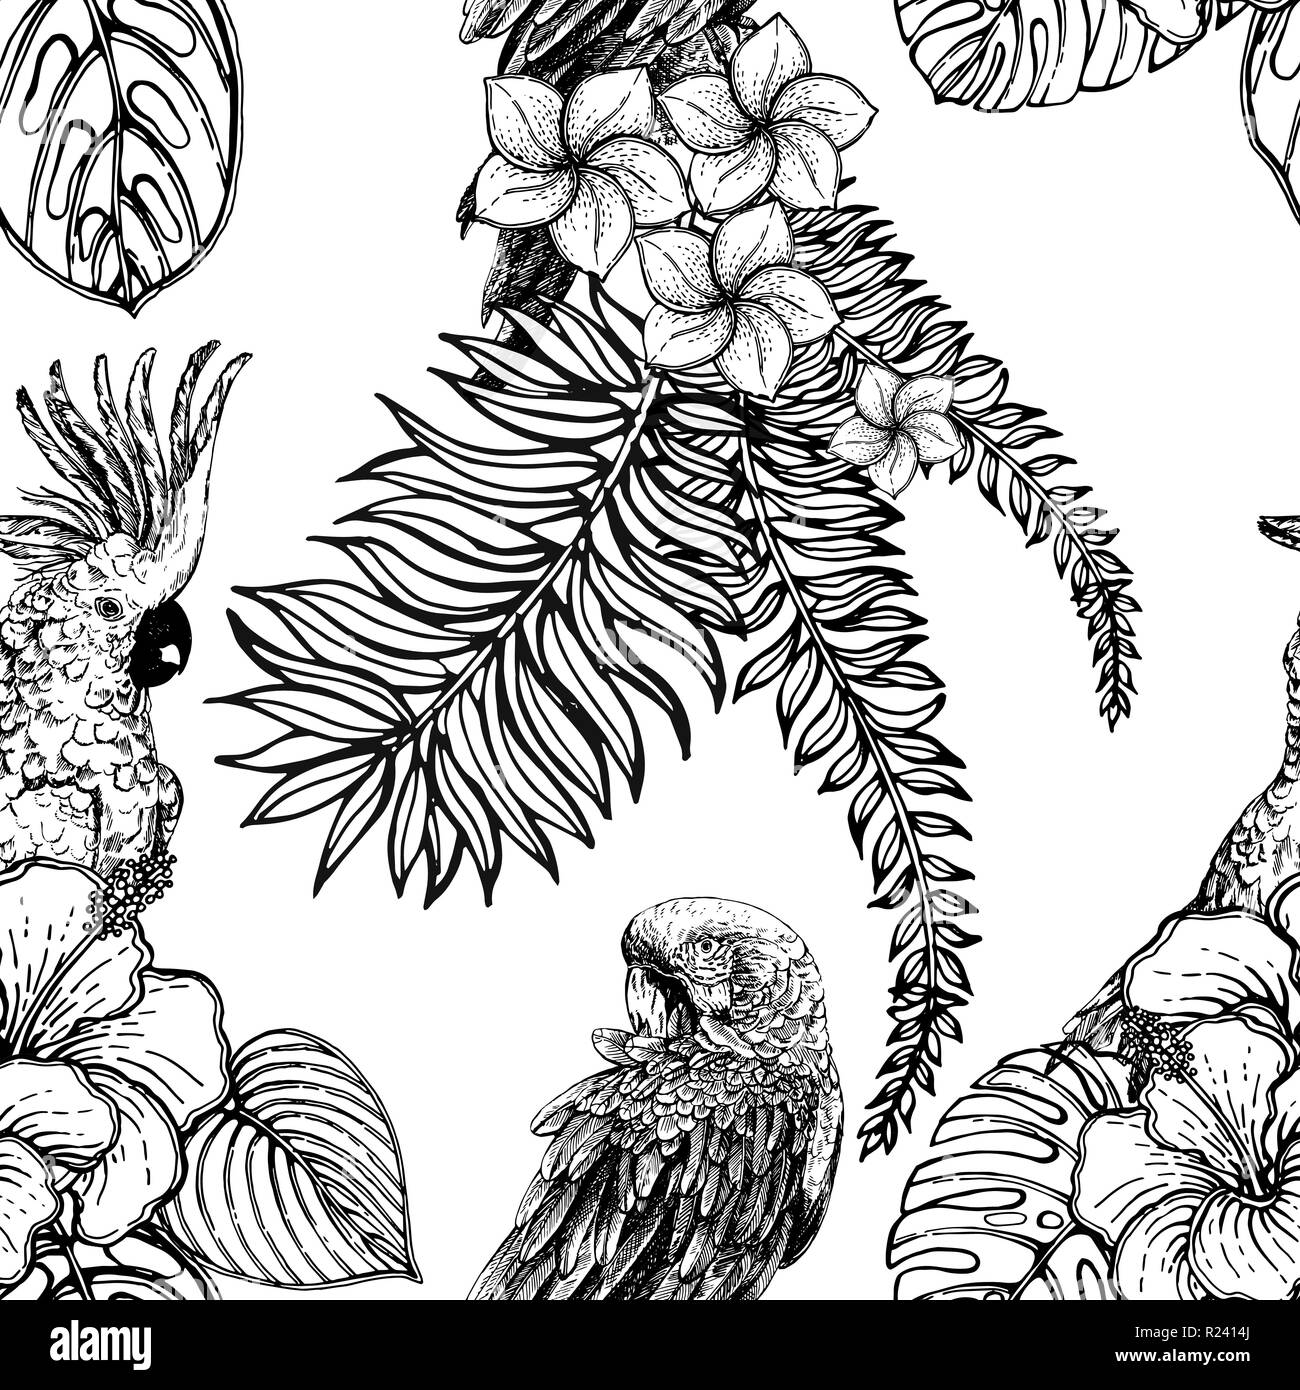 Seamless pattern of hand drawn sketch style exotic flowers, plants and birds isolated on white background. Vector illustration. Stock Vector